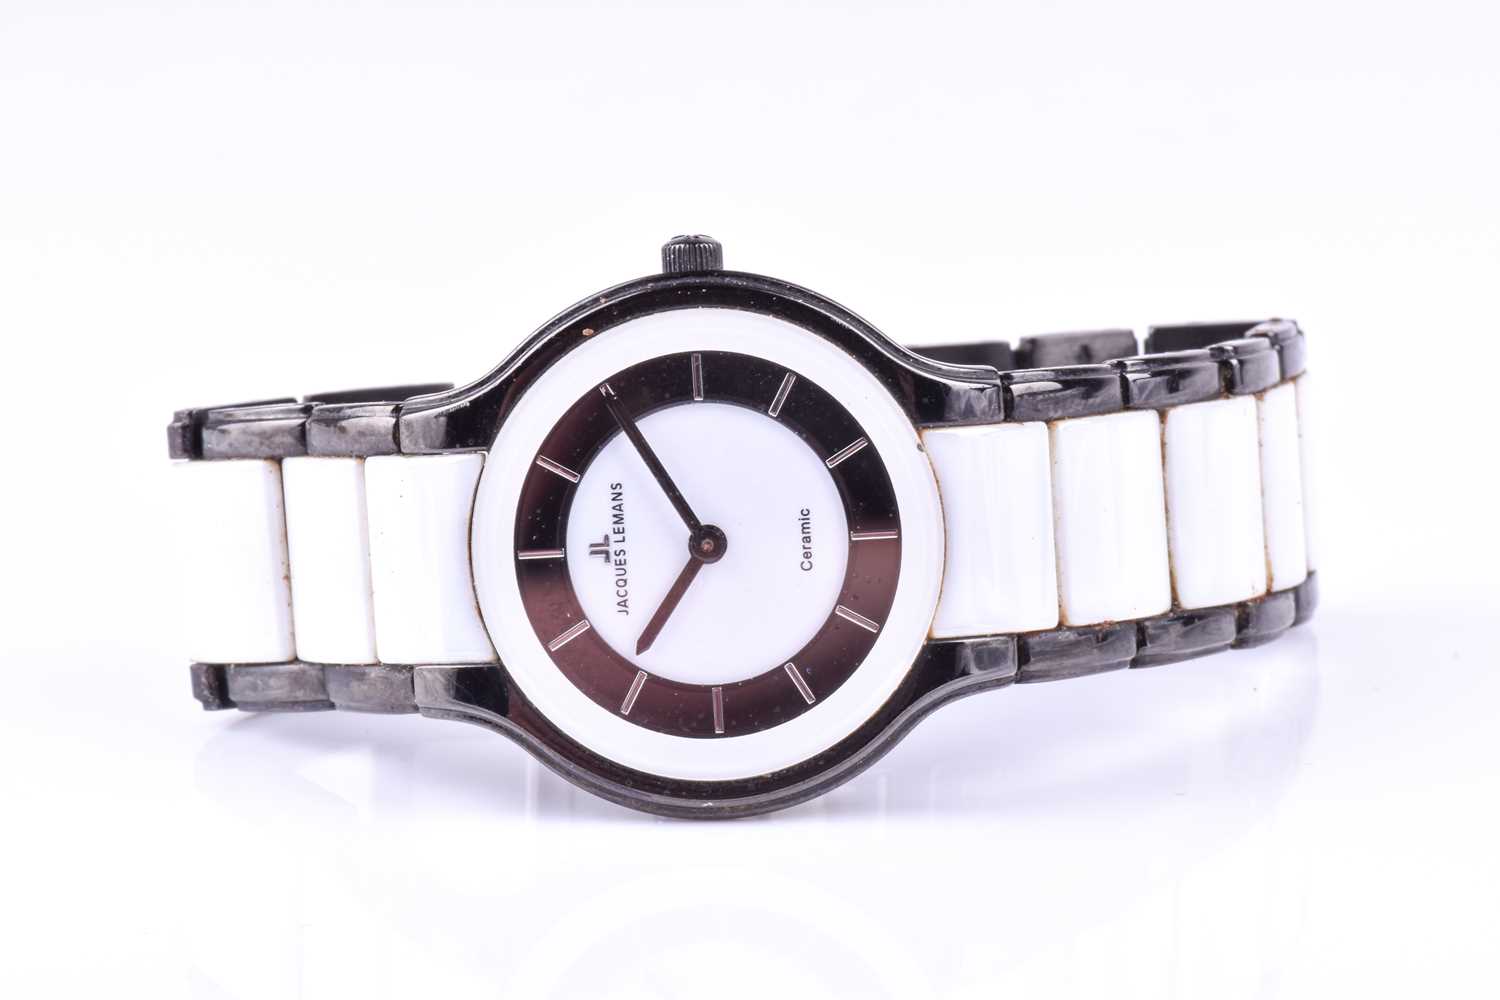 A Jacques Lemans ceramic wristwatch, the black and white minimalist dial on black and white